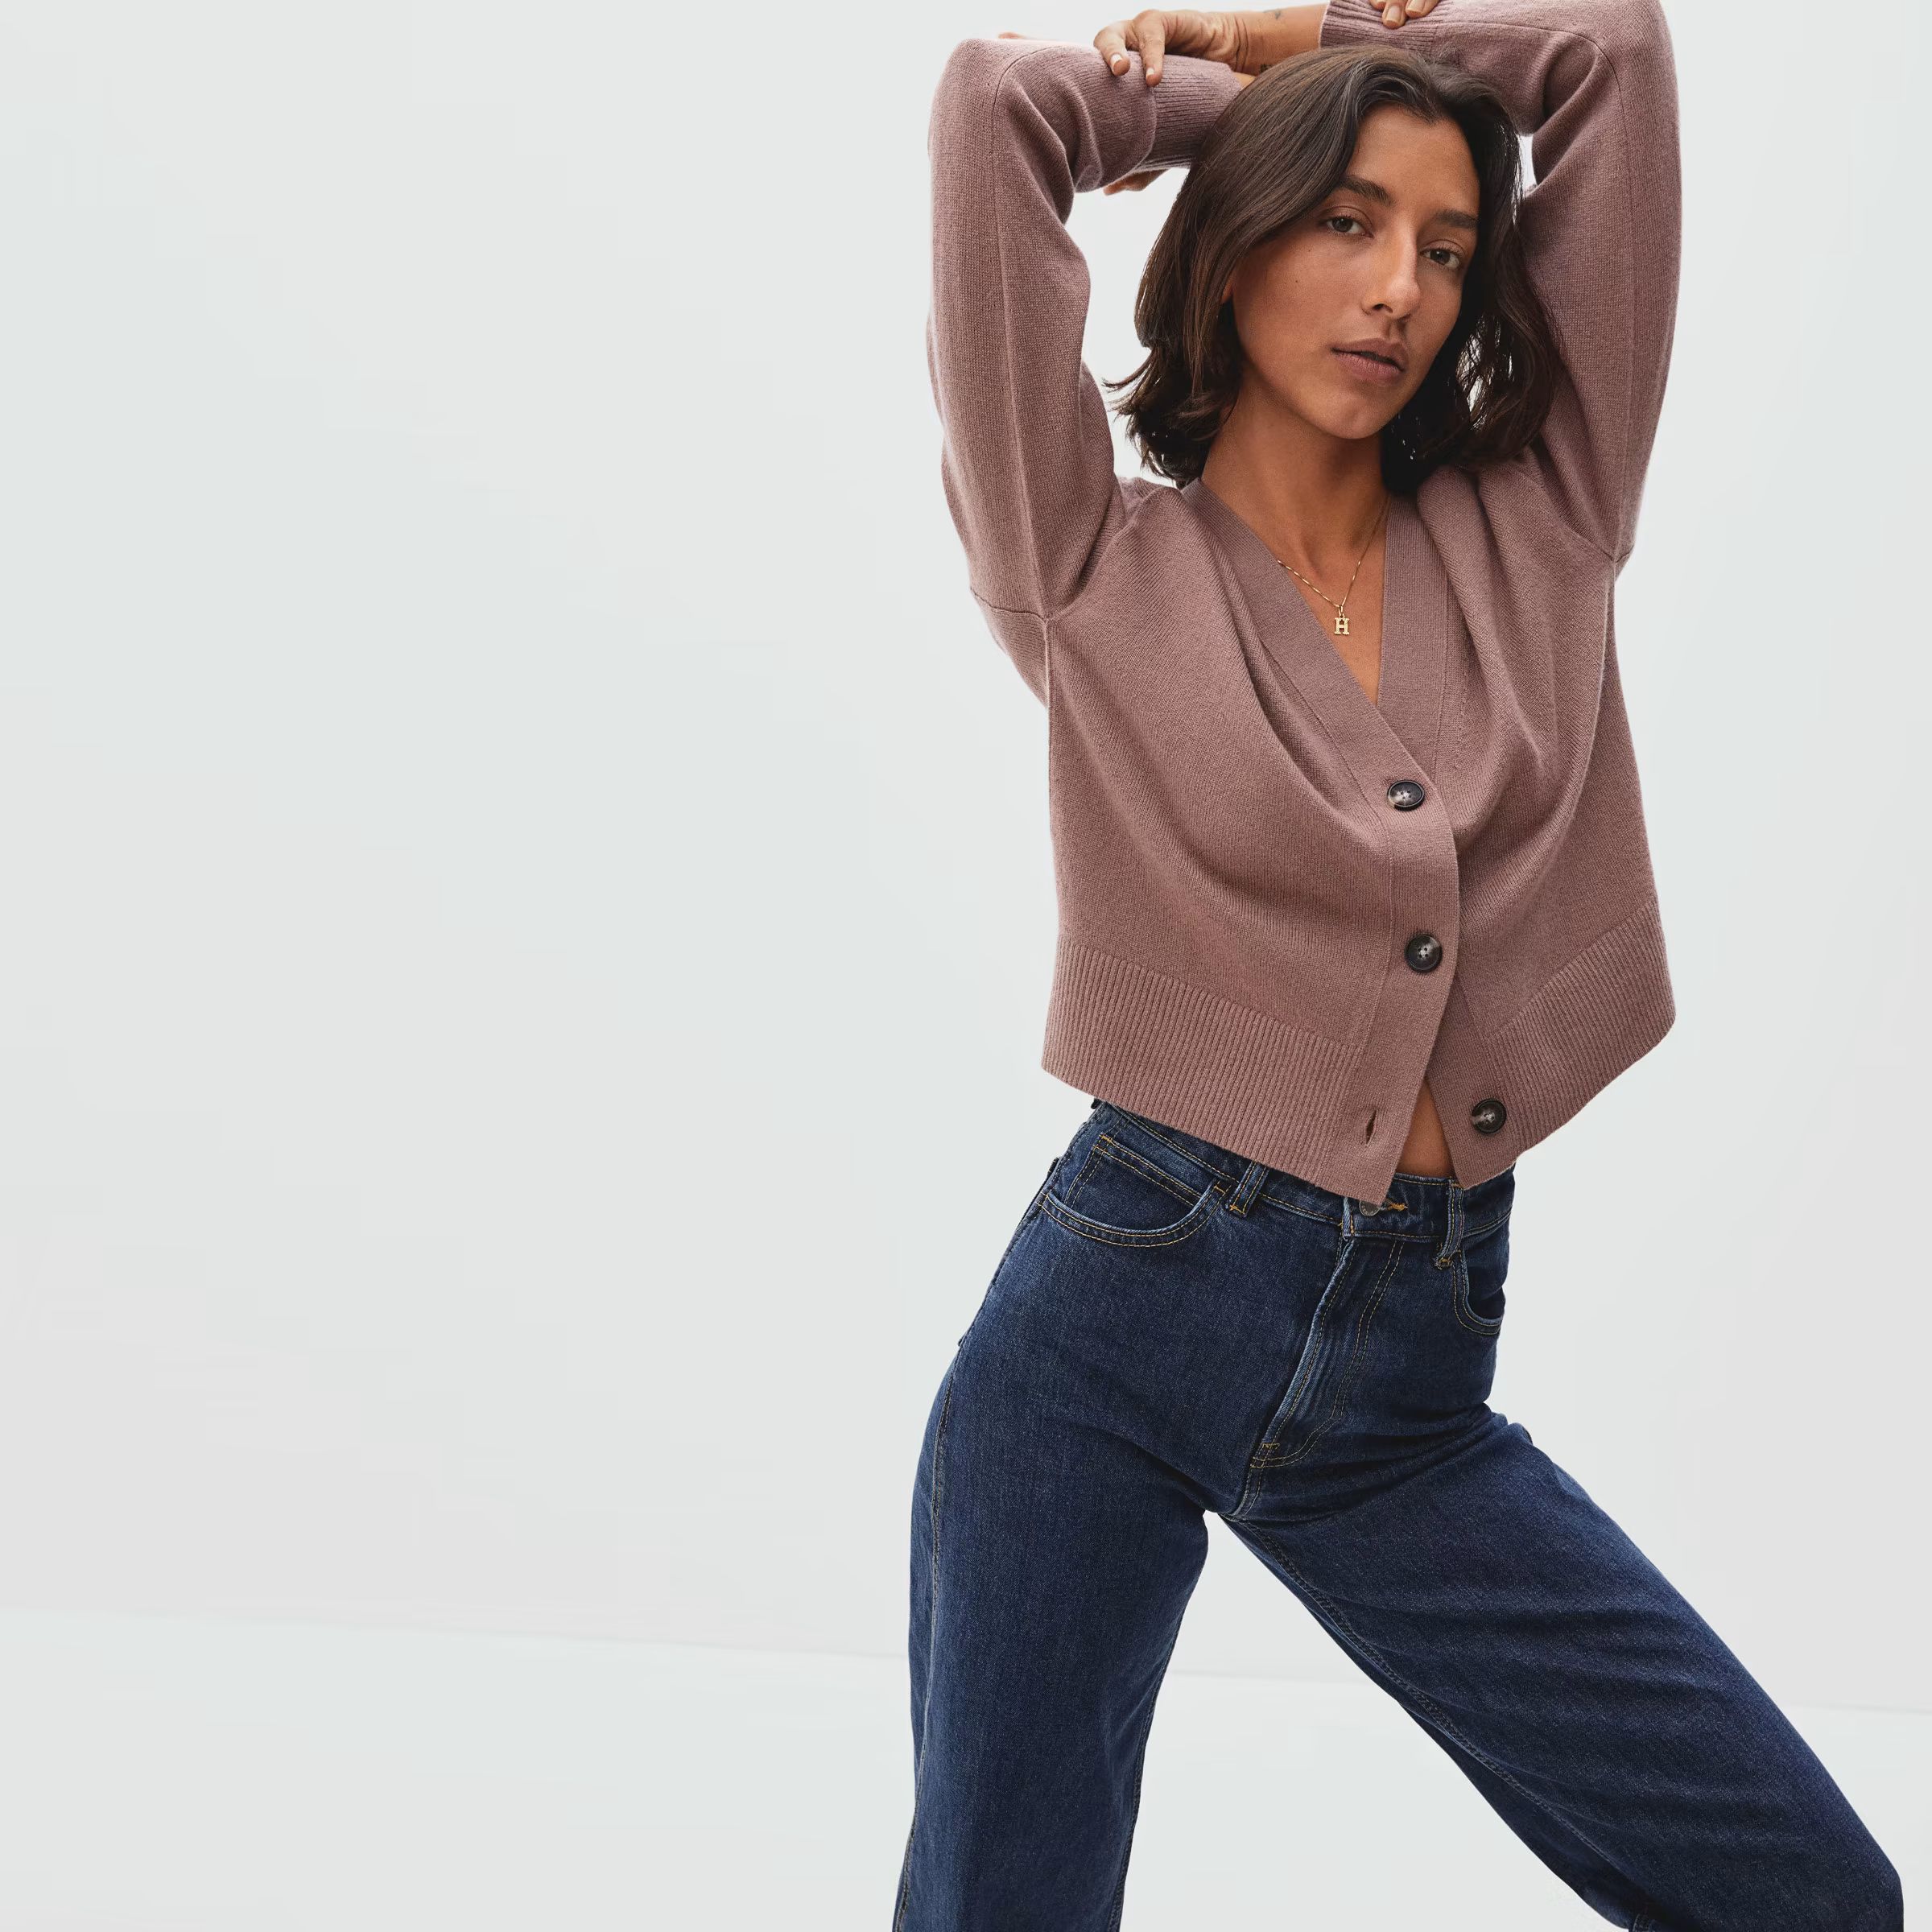 The Cropped Cashmere Cardigan | Everlane